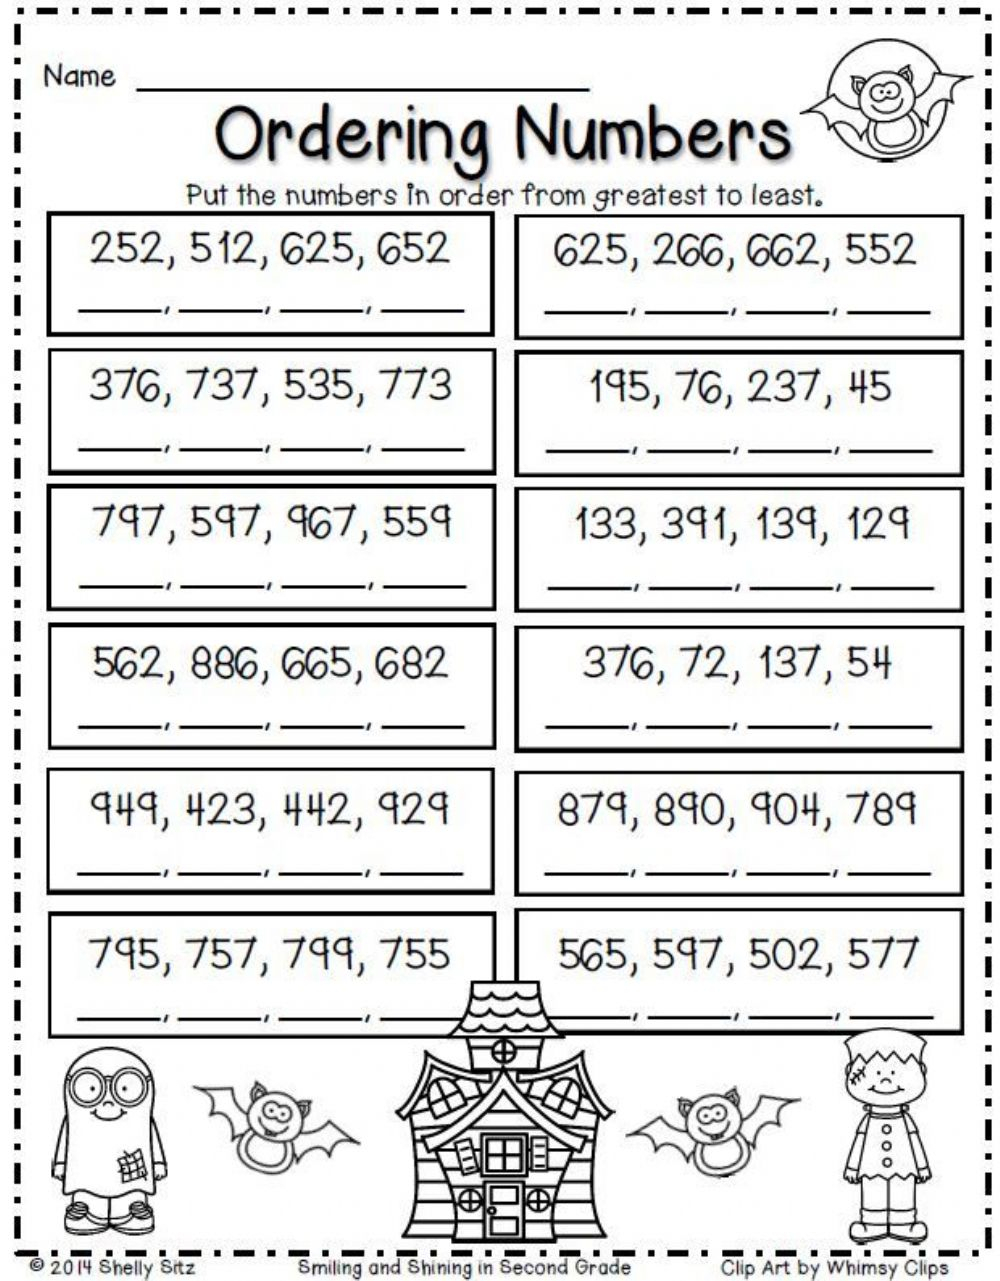 3rd-grade-math-worksheets-comparing-and-ordering-numbers-lesson-1-3-3rd-grade-math-worksheets